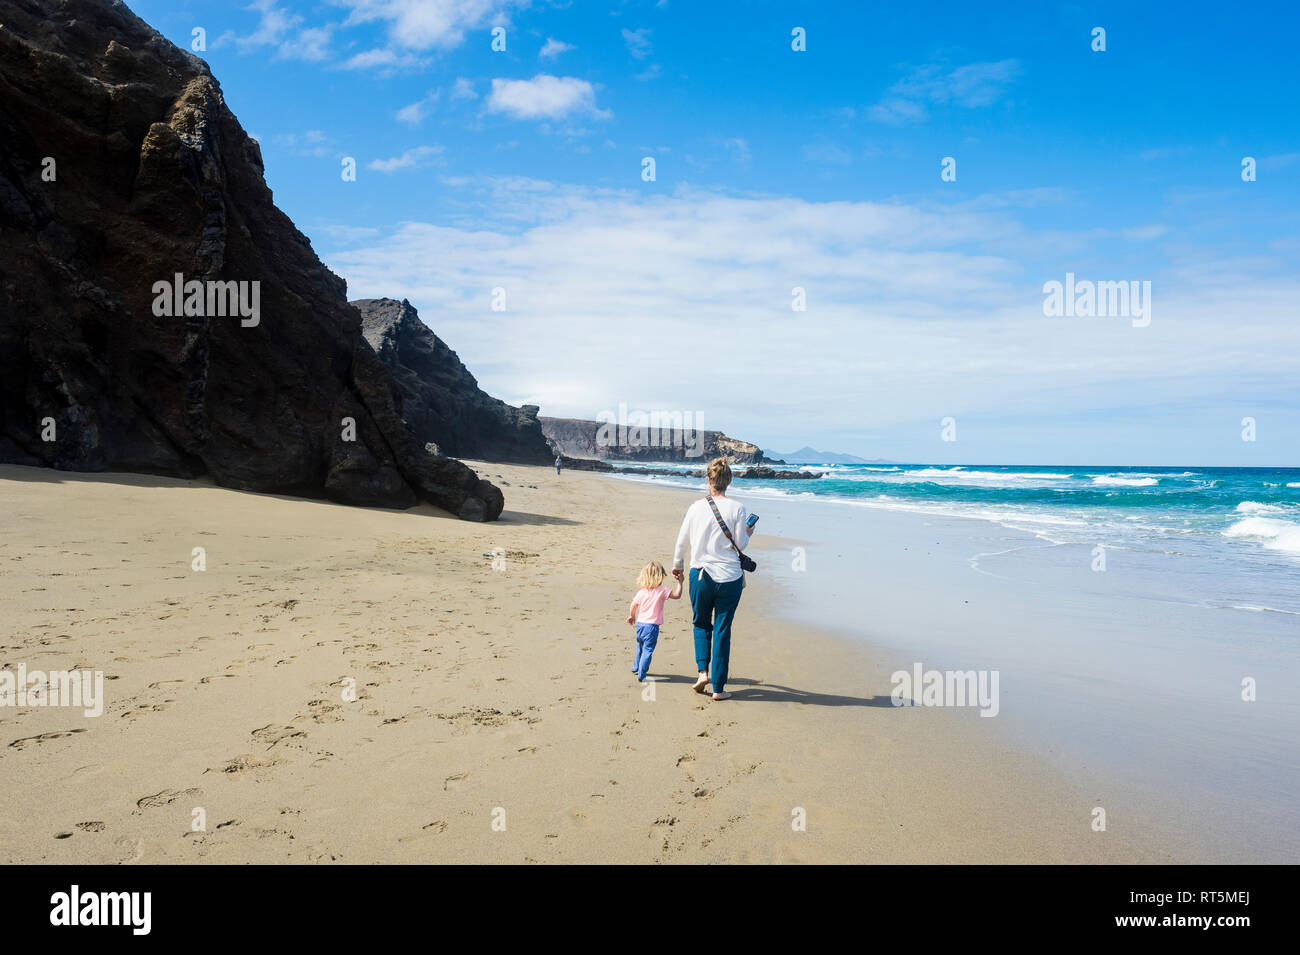 Spain, Canary Islands, Fuerteventura, La Pared, Playa del Viejo Rey, mother and daughter walking on the beach Stock Photo